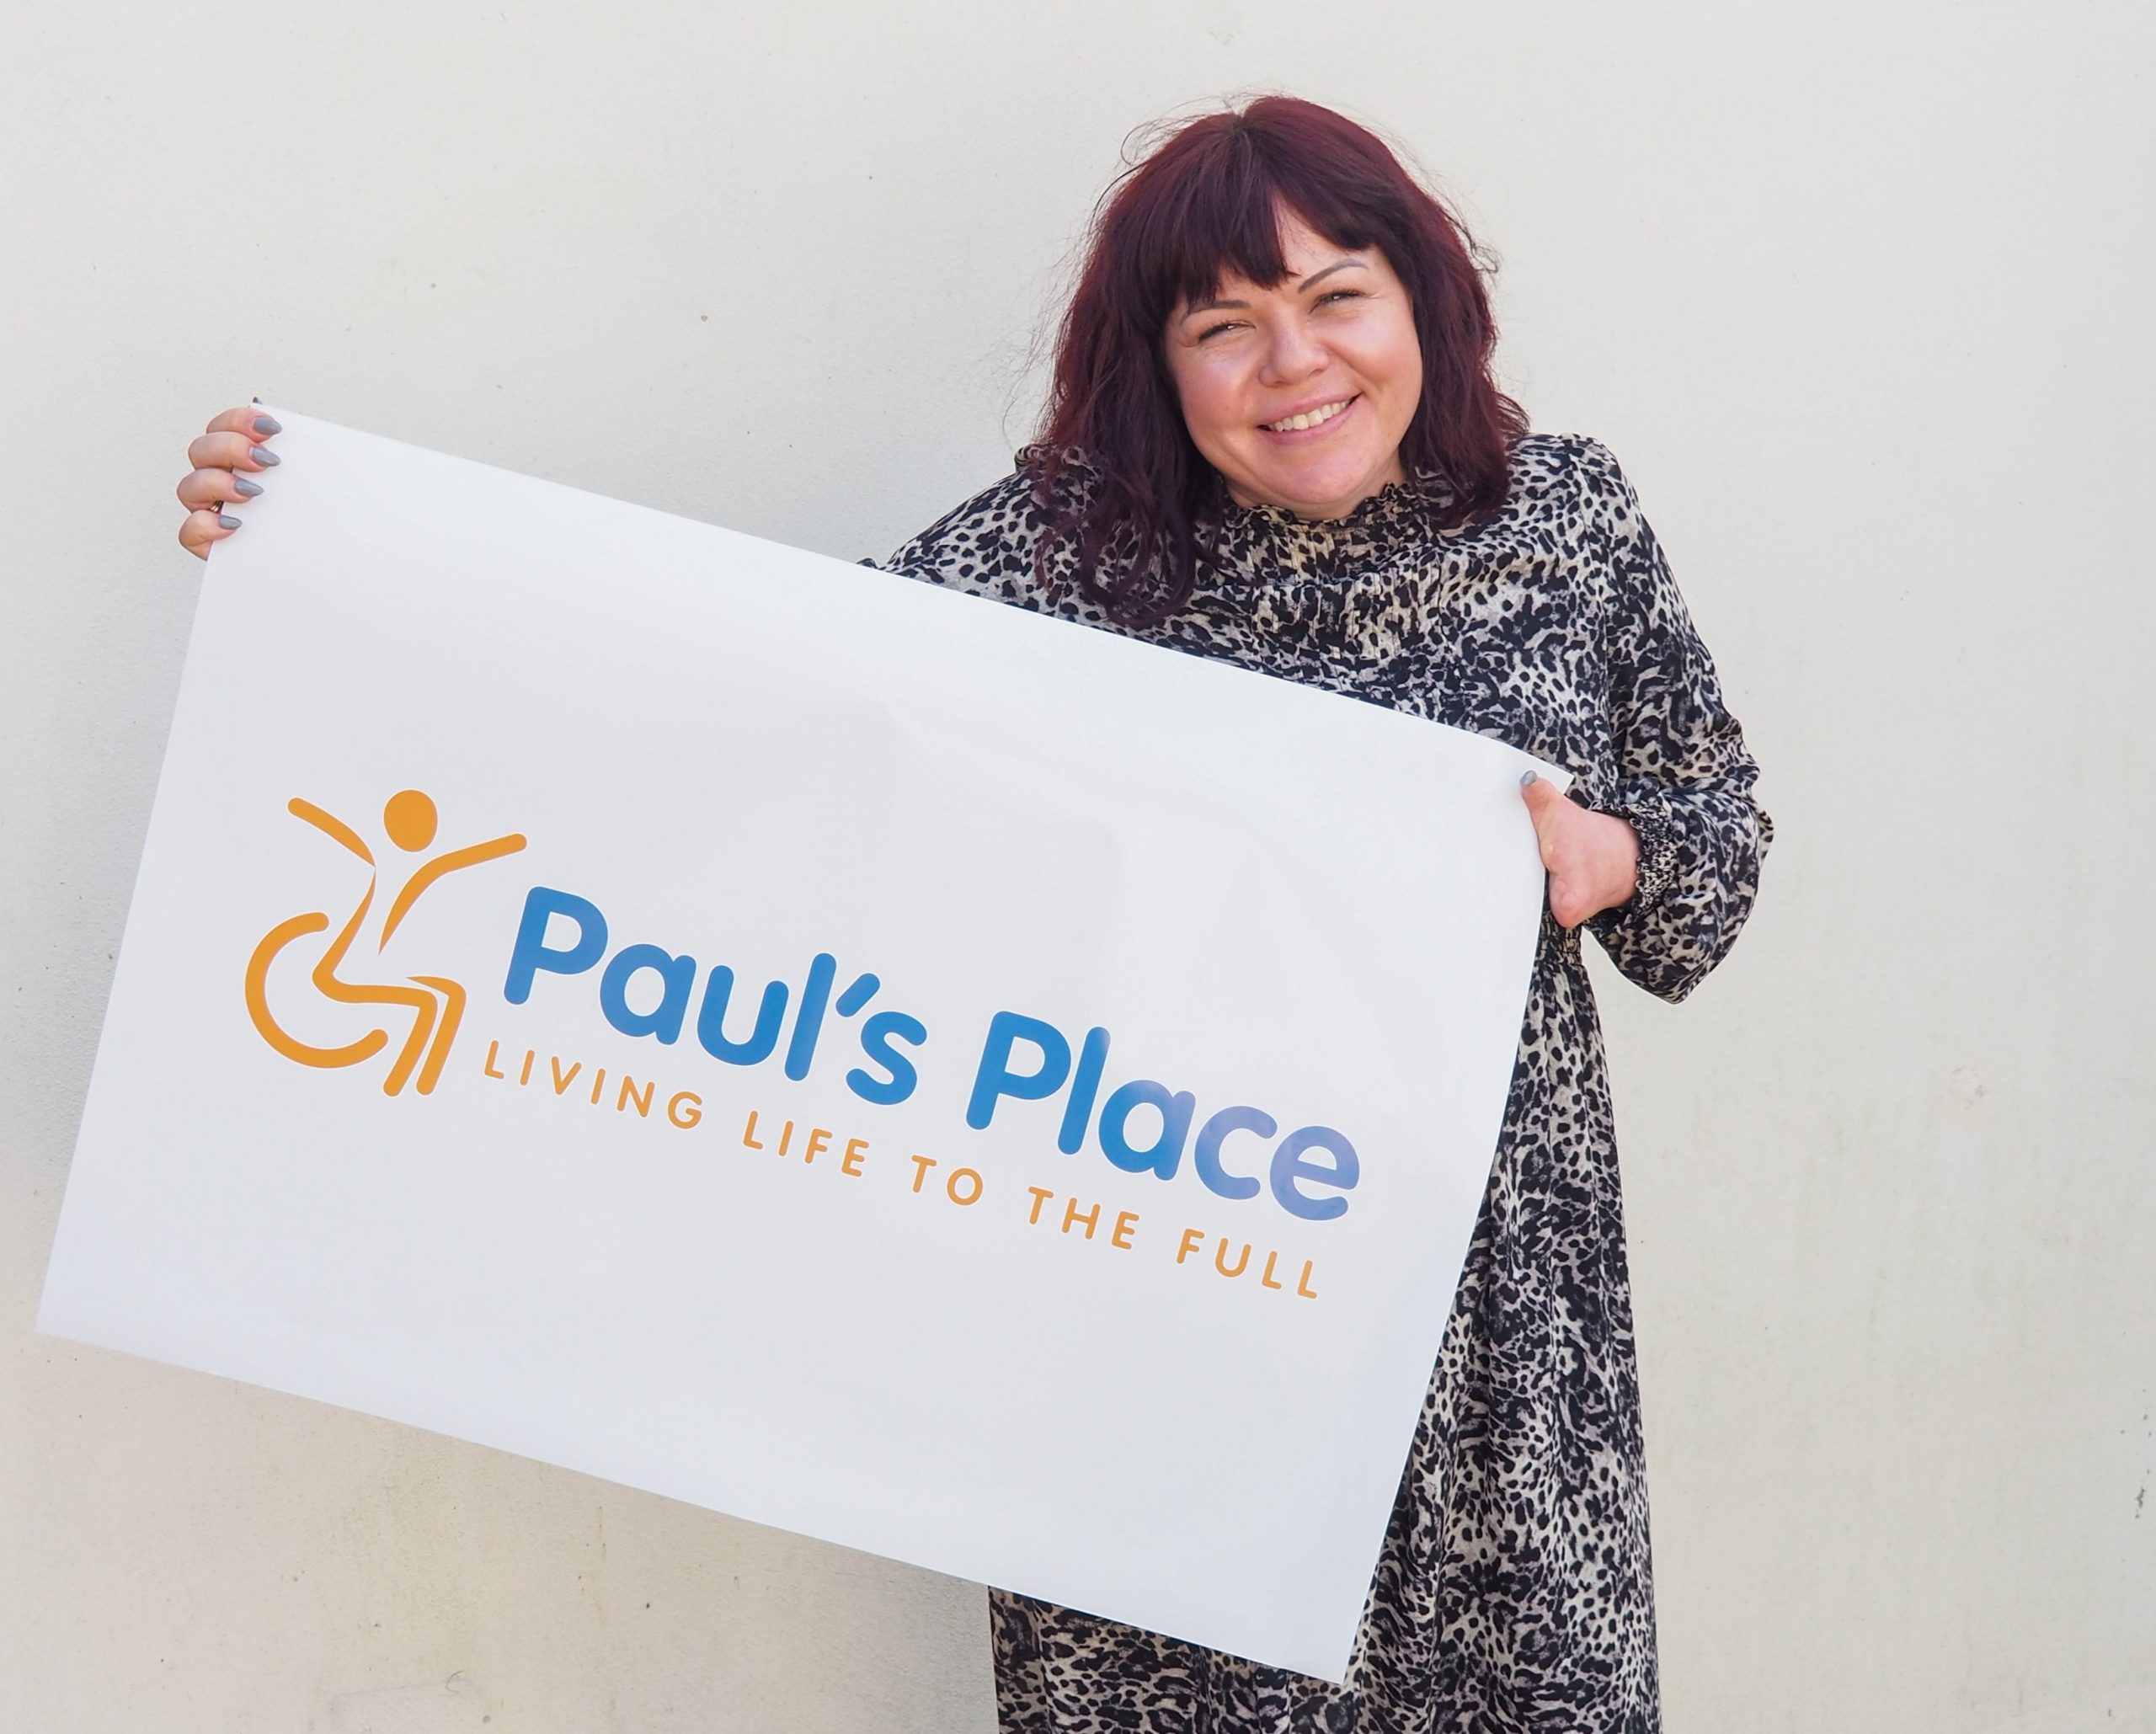 Briony May smiling holding up Paul's Place New Logo on a poster